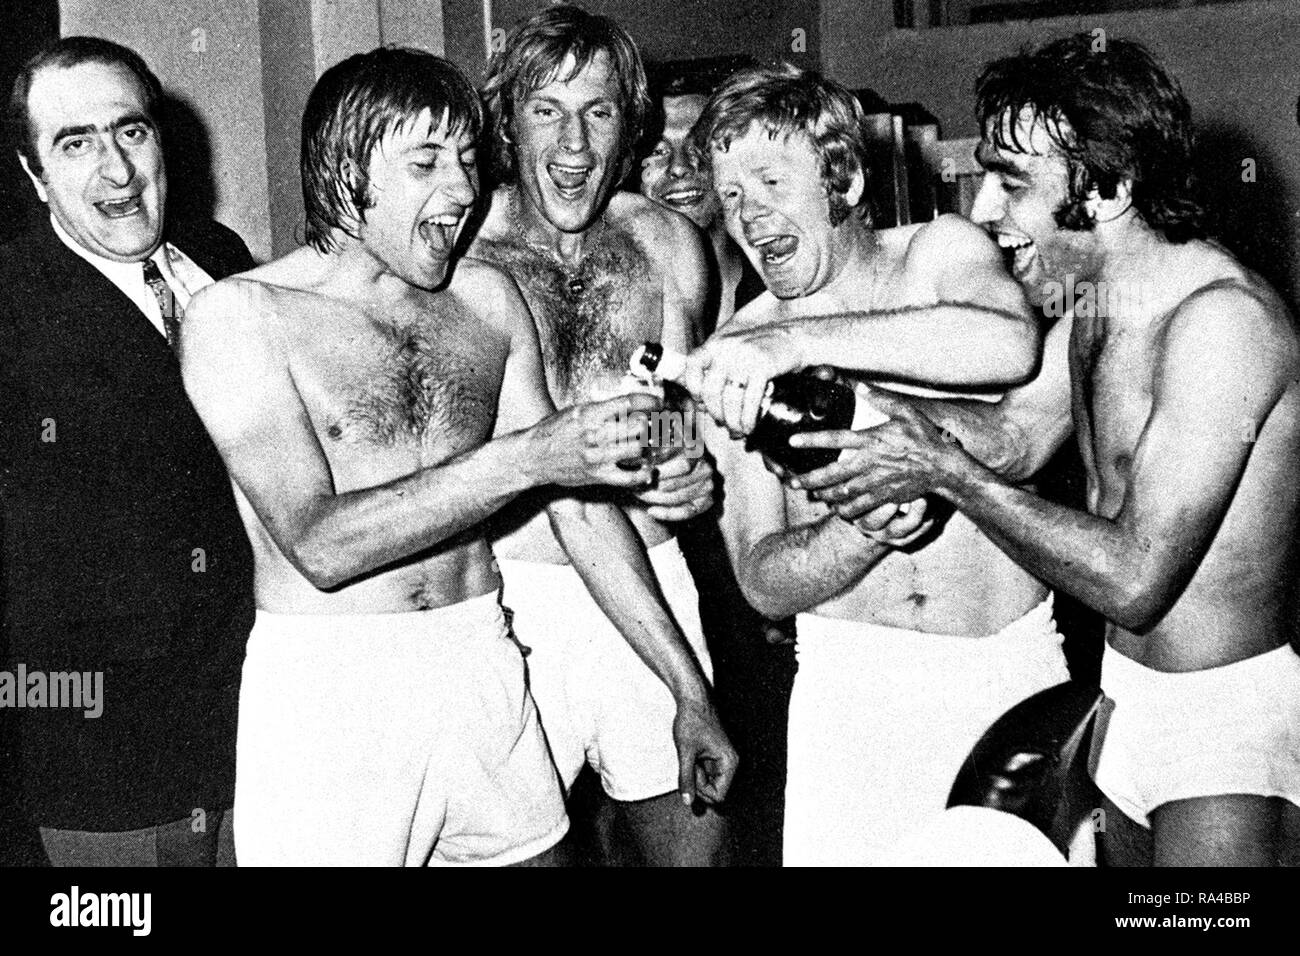 Rome, Olimpico stadium, 20 May 1973. Juventus staff and players - from left: the social doctor dr. Francesco La Neve, Gianpietro Marchetti, Francesco Morini, Helmut Haller and Pietro Anastasi - celebrate in the locker room at the end the challenge against Roma Stock Photo